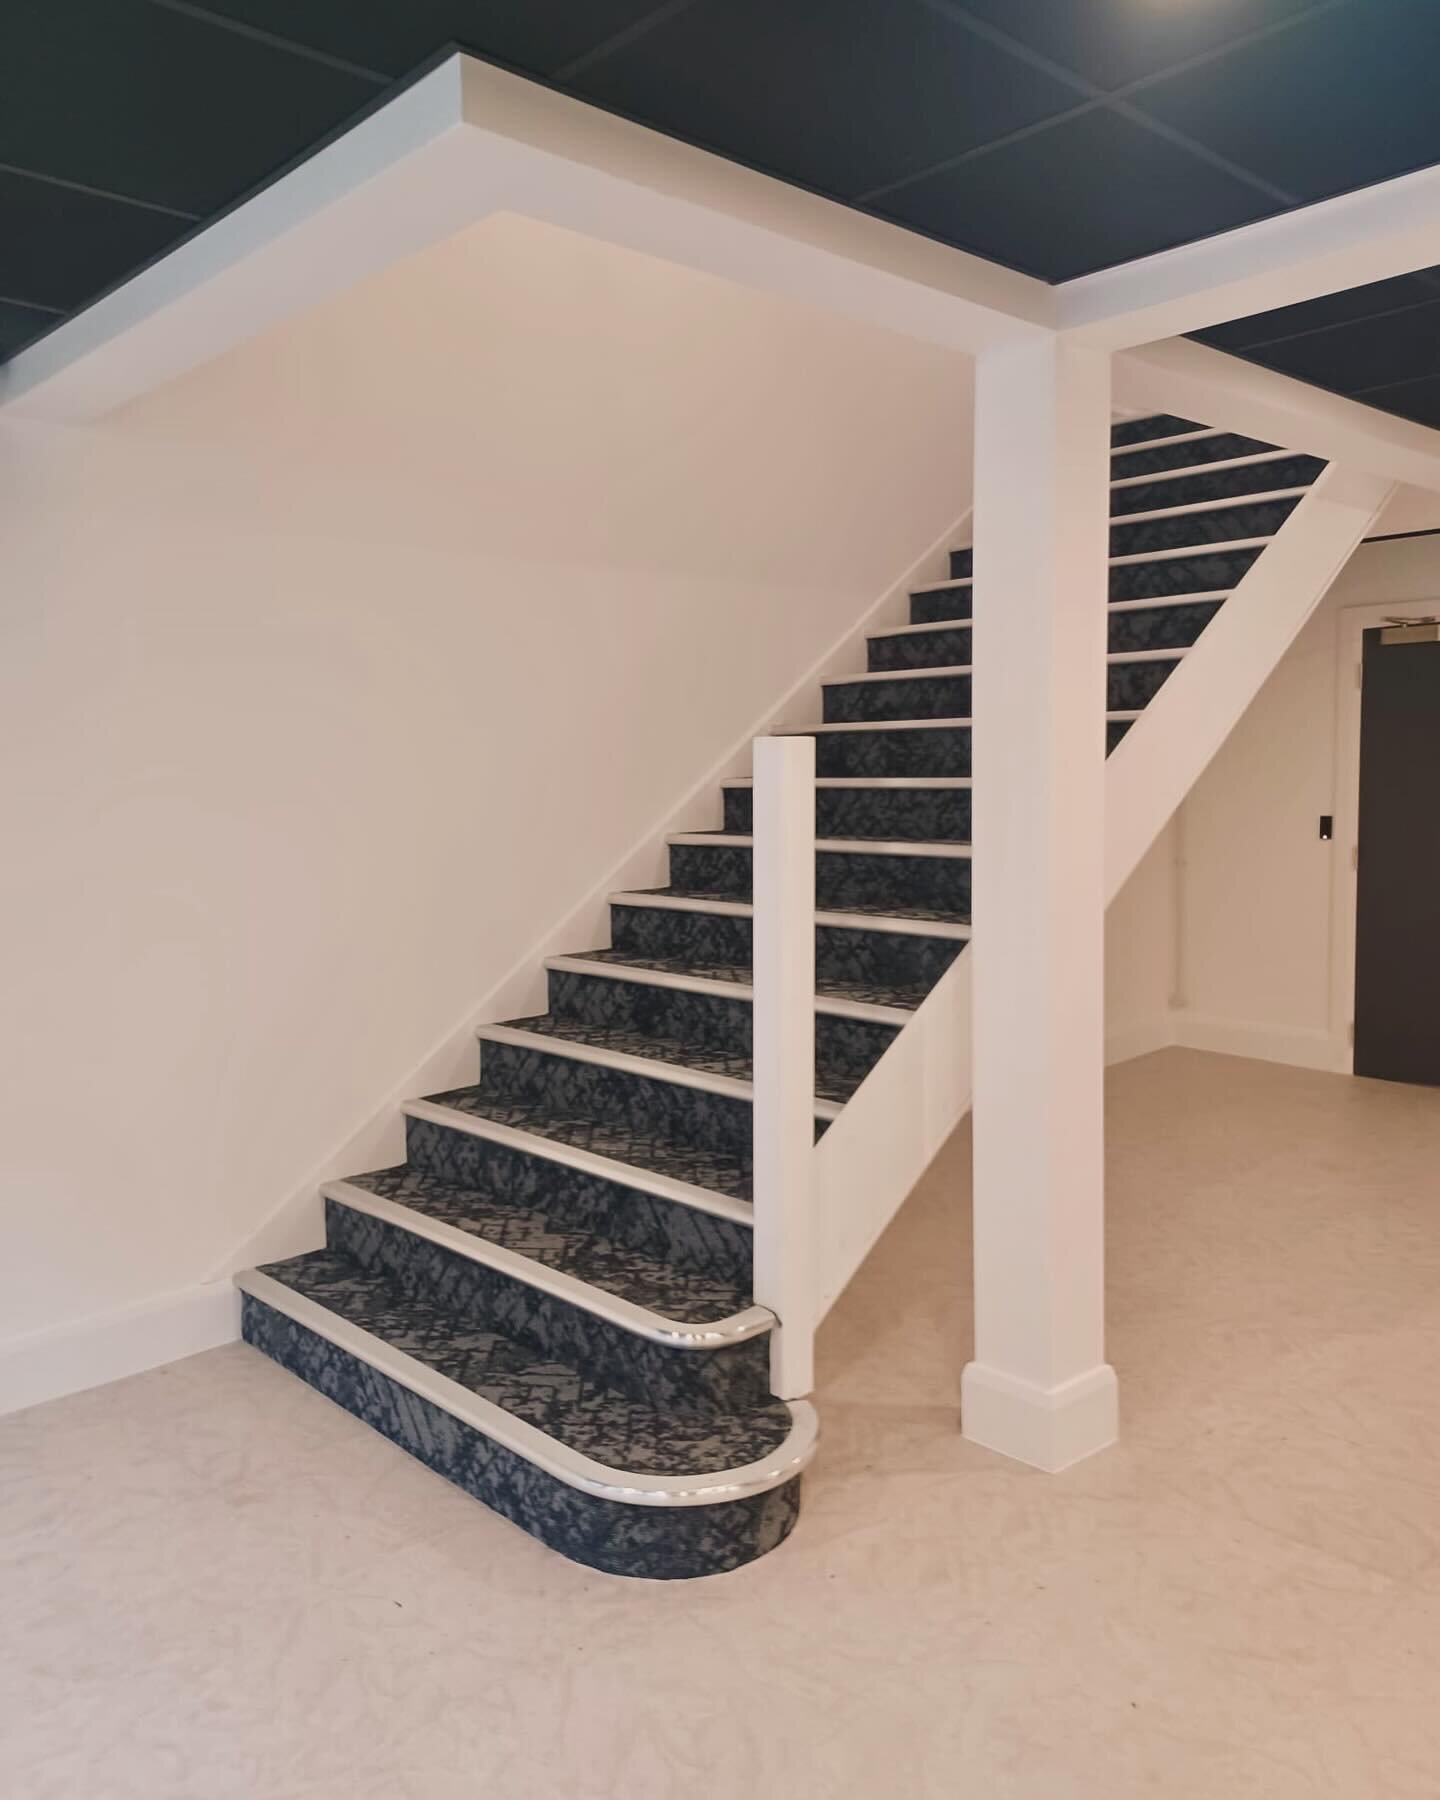 If you&rsquo;re looking for an office fit out or staircase work then look no further!
Nosings can be curved to suit steps as required giving a perfect bespoke finish.